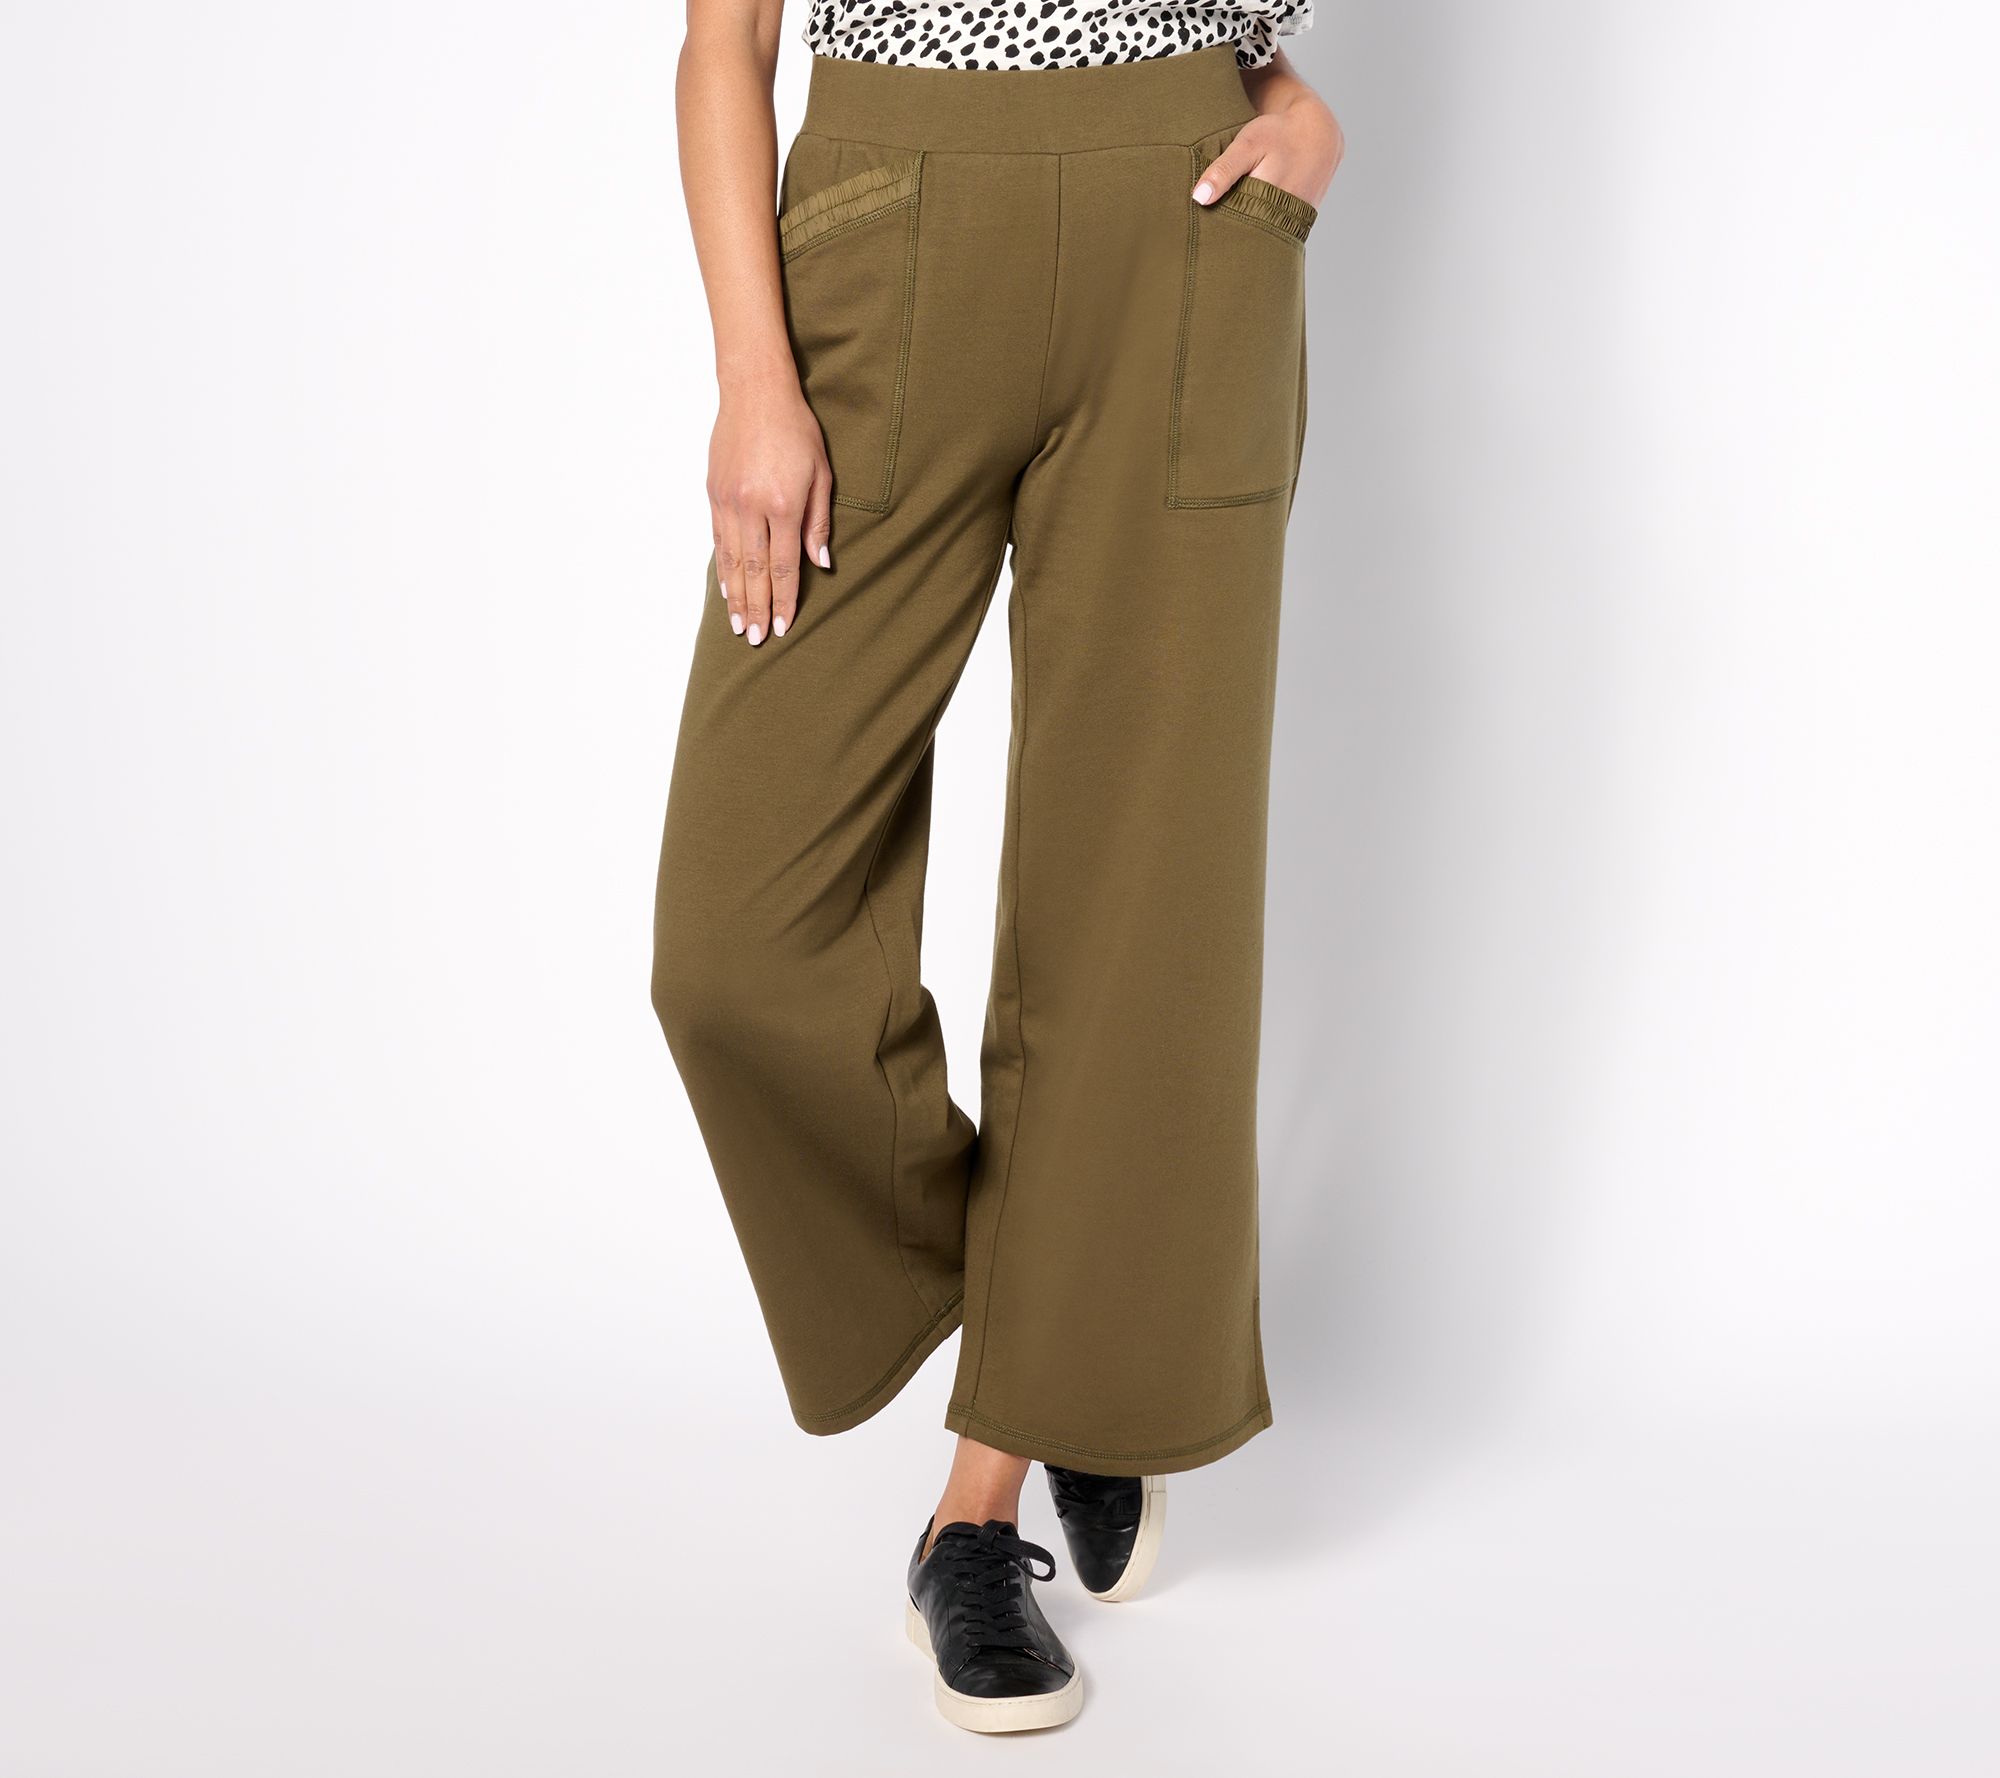 Closed Jeans Women's Brown/Gold Cotton Italy Skinny Baker Pants